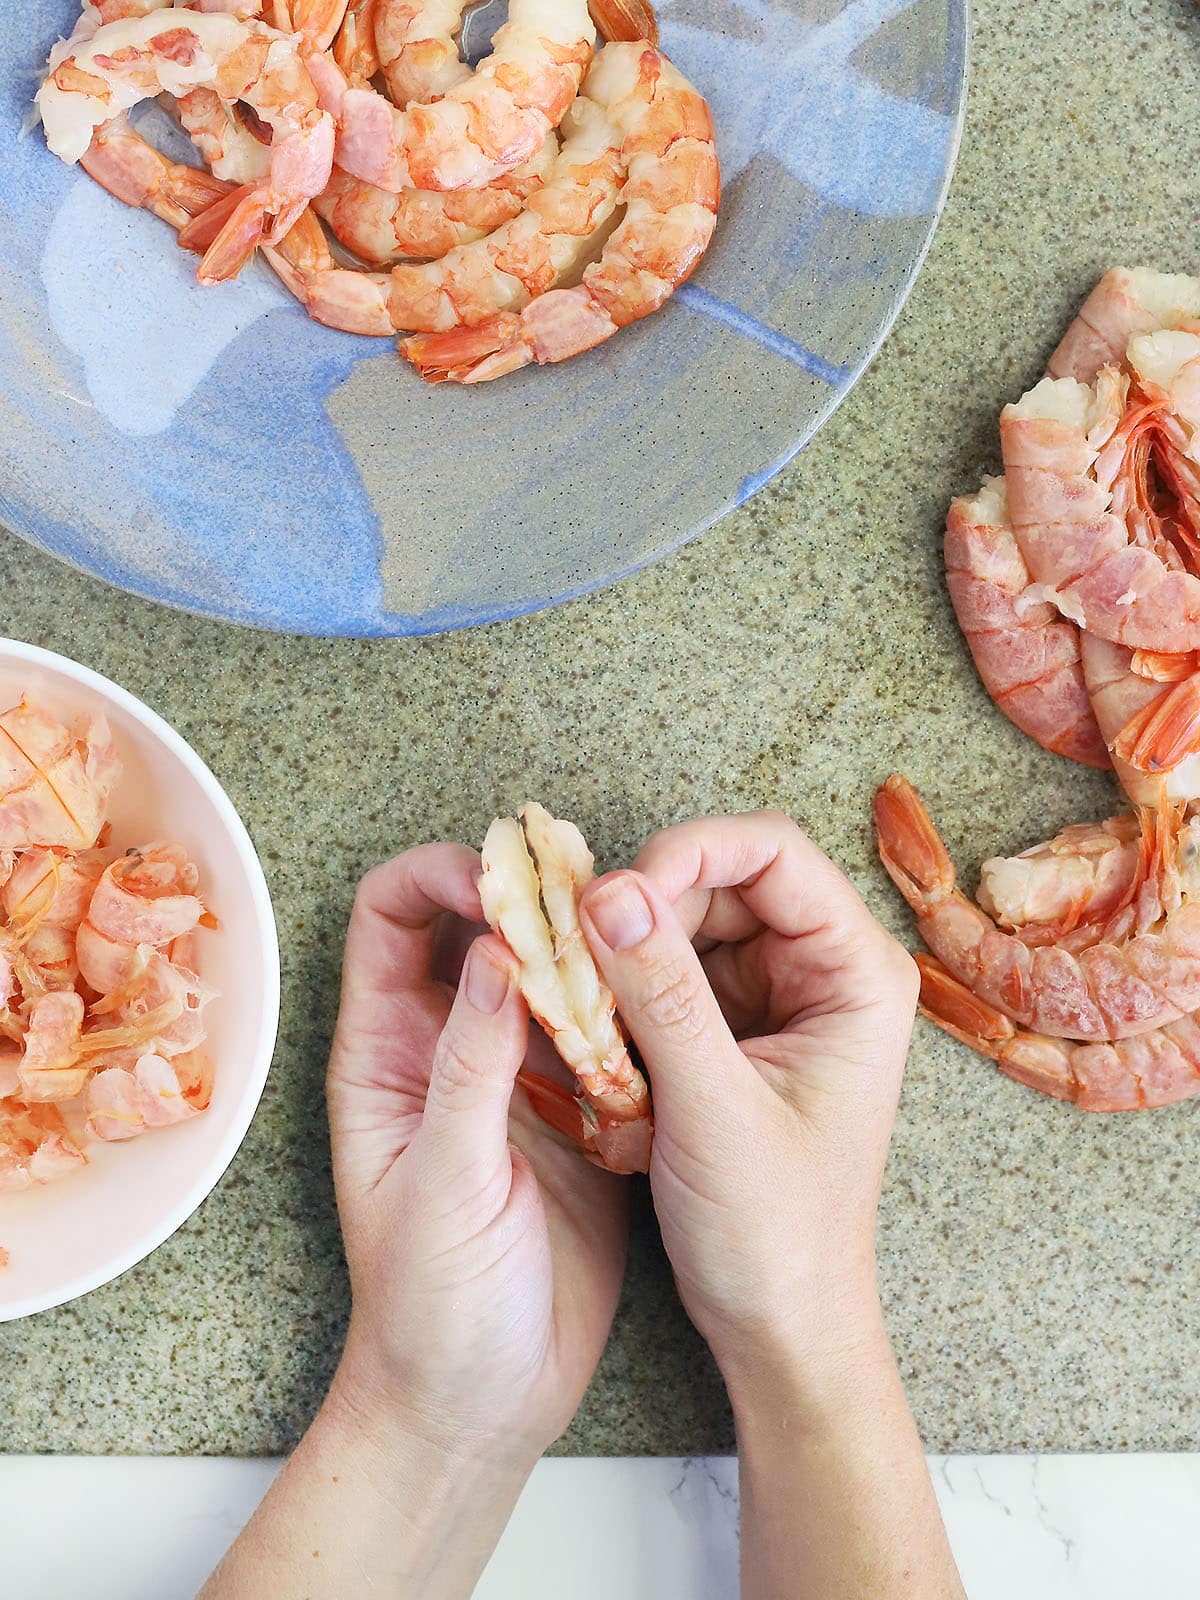 hands pulling back two cut sides of a shrimp to reveal the sand vein